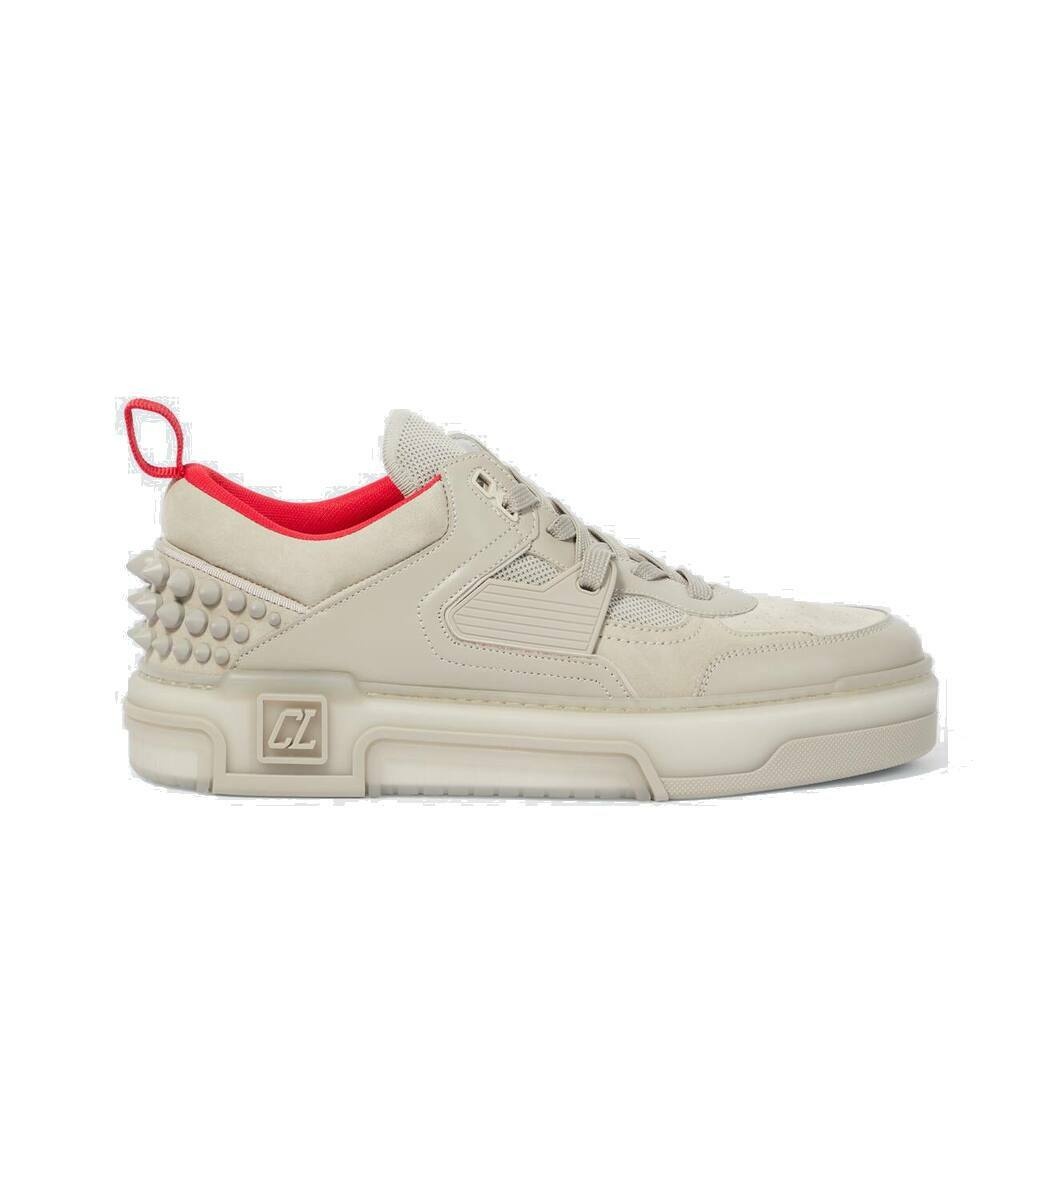 Photo: Christian Louboutin Astroloubi leather and suede sneakers